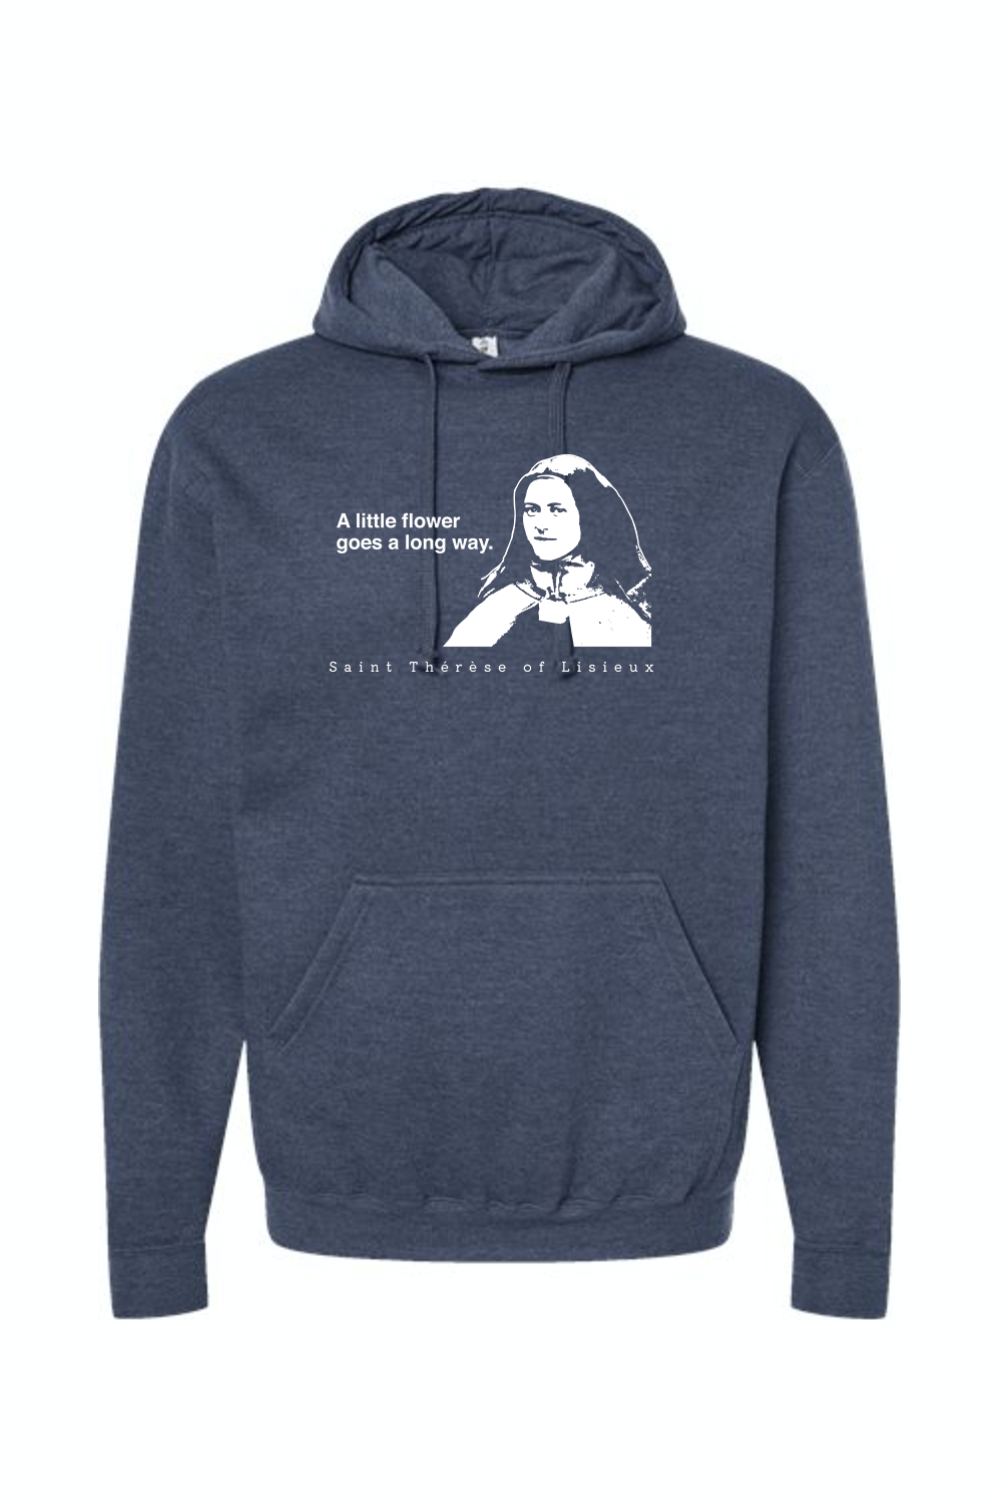 A Little Flower Goes a Long Way - St. Therese of Lisieux Hoodie Sweatshirt